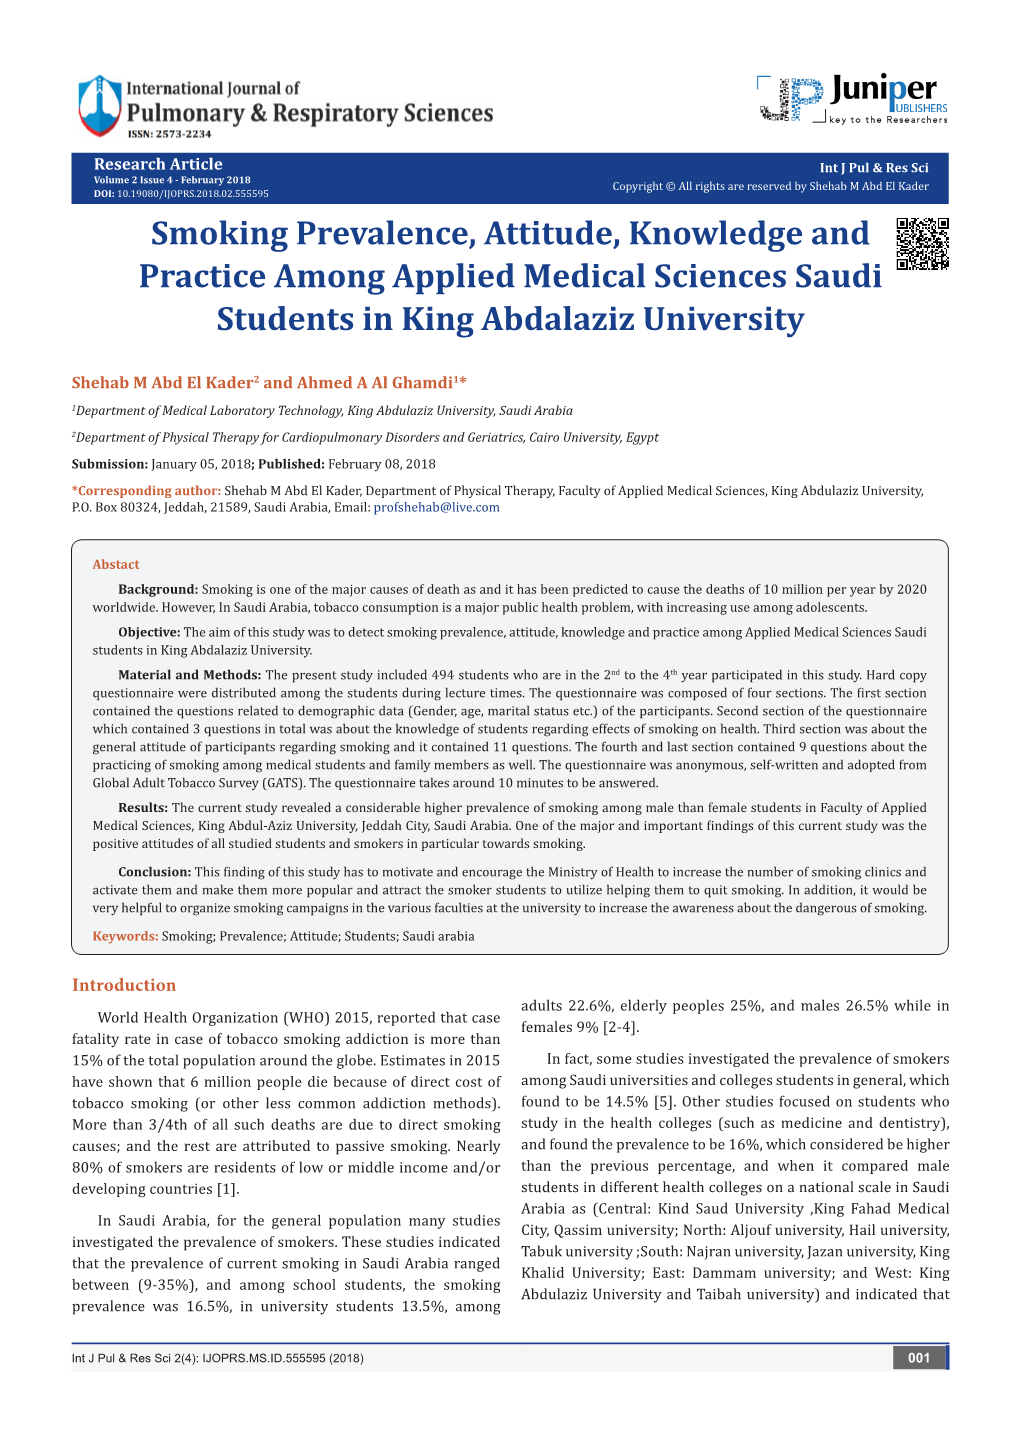 Smoking Prevalence, Attitude, Knowledge and Practice Among Applied Medical Sciences Saudi Students in King Abdalaziz University